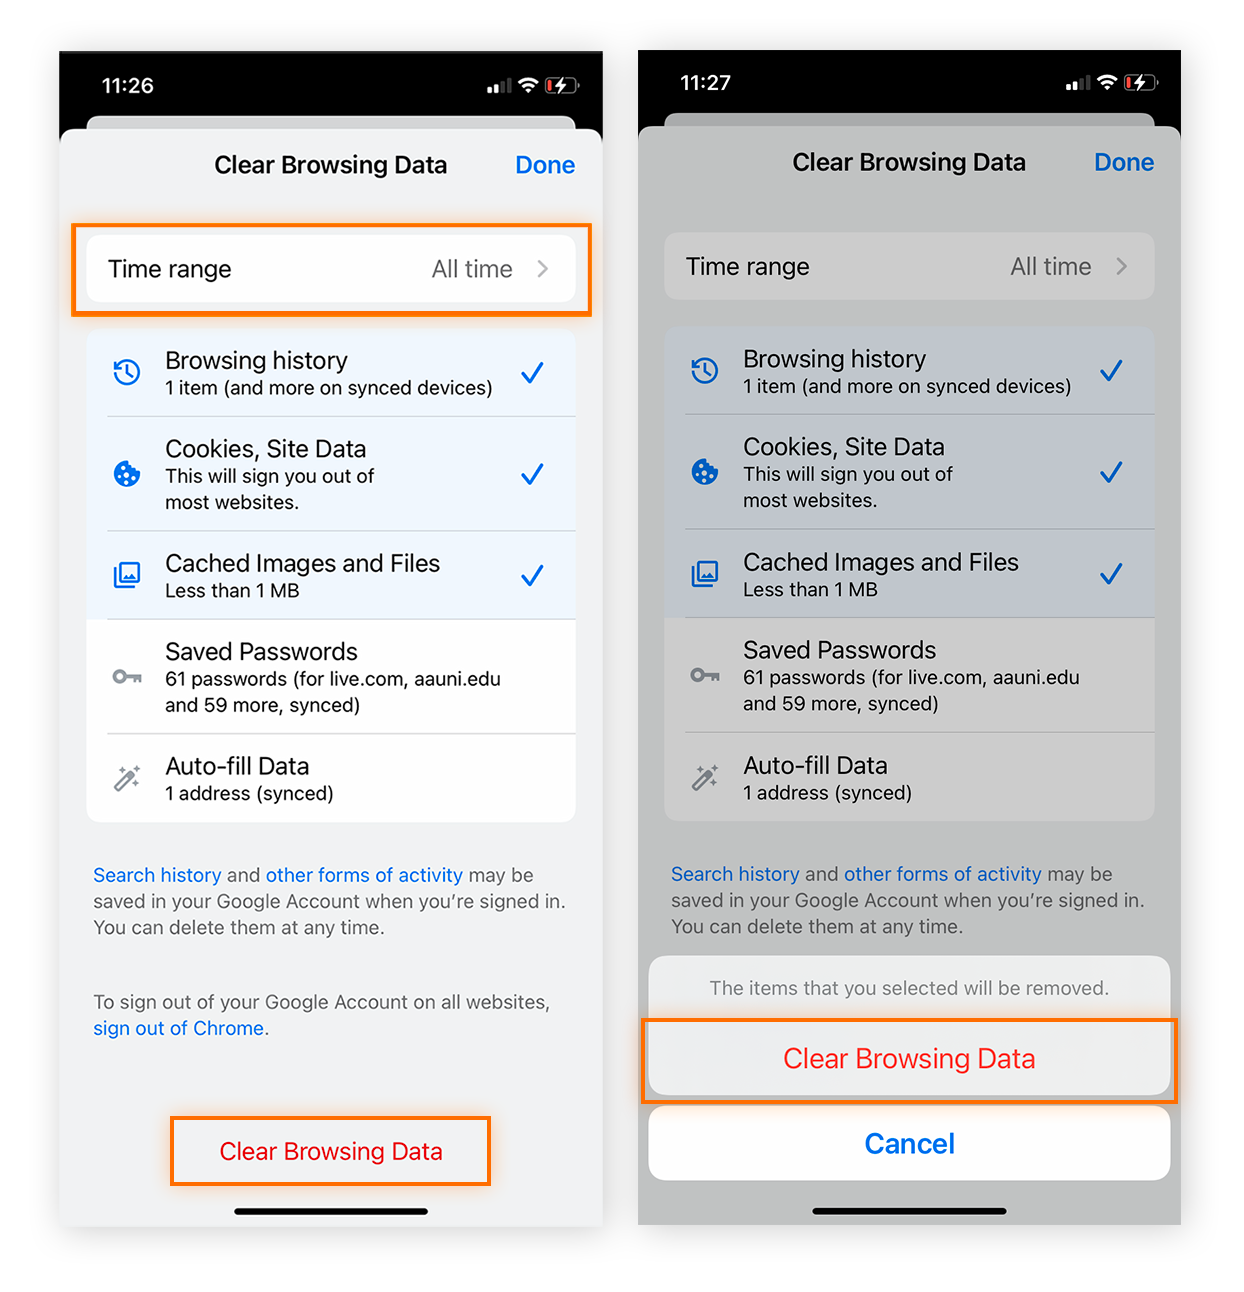 Deleting Google search history by clearing browsing history data in Chrome for iOS.